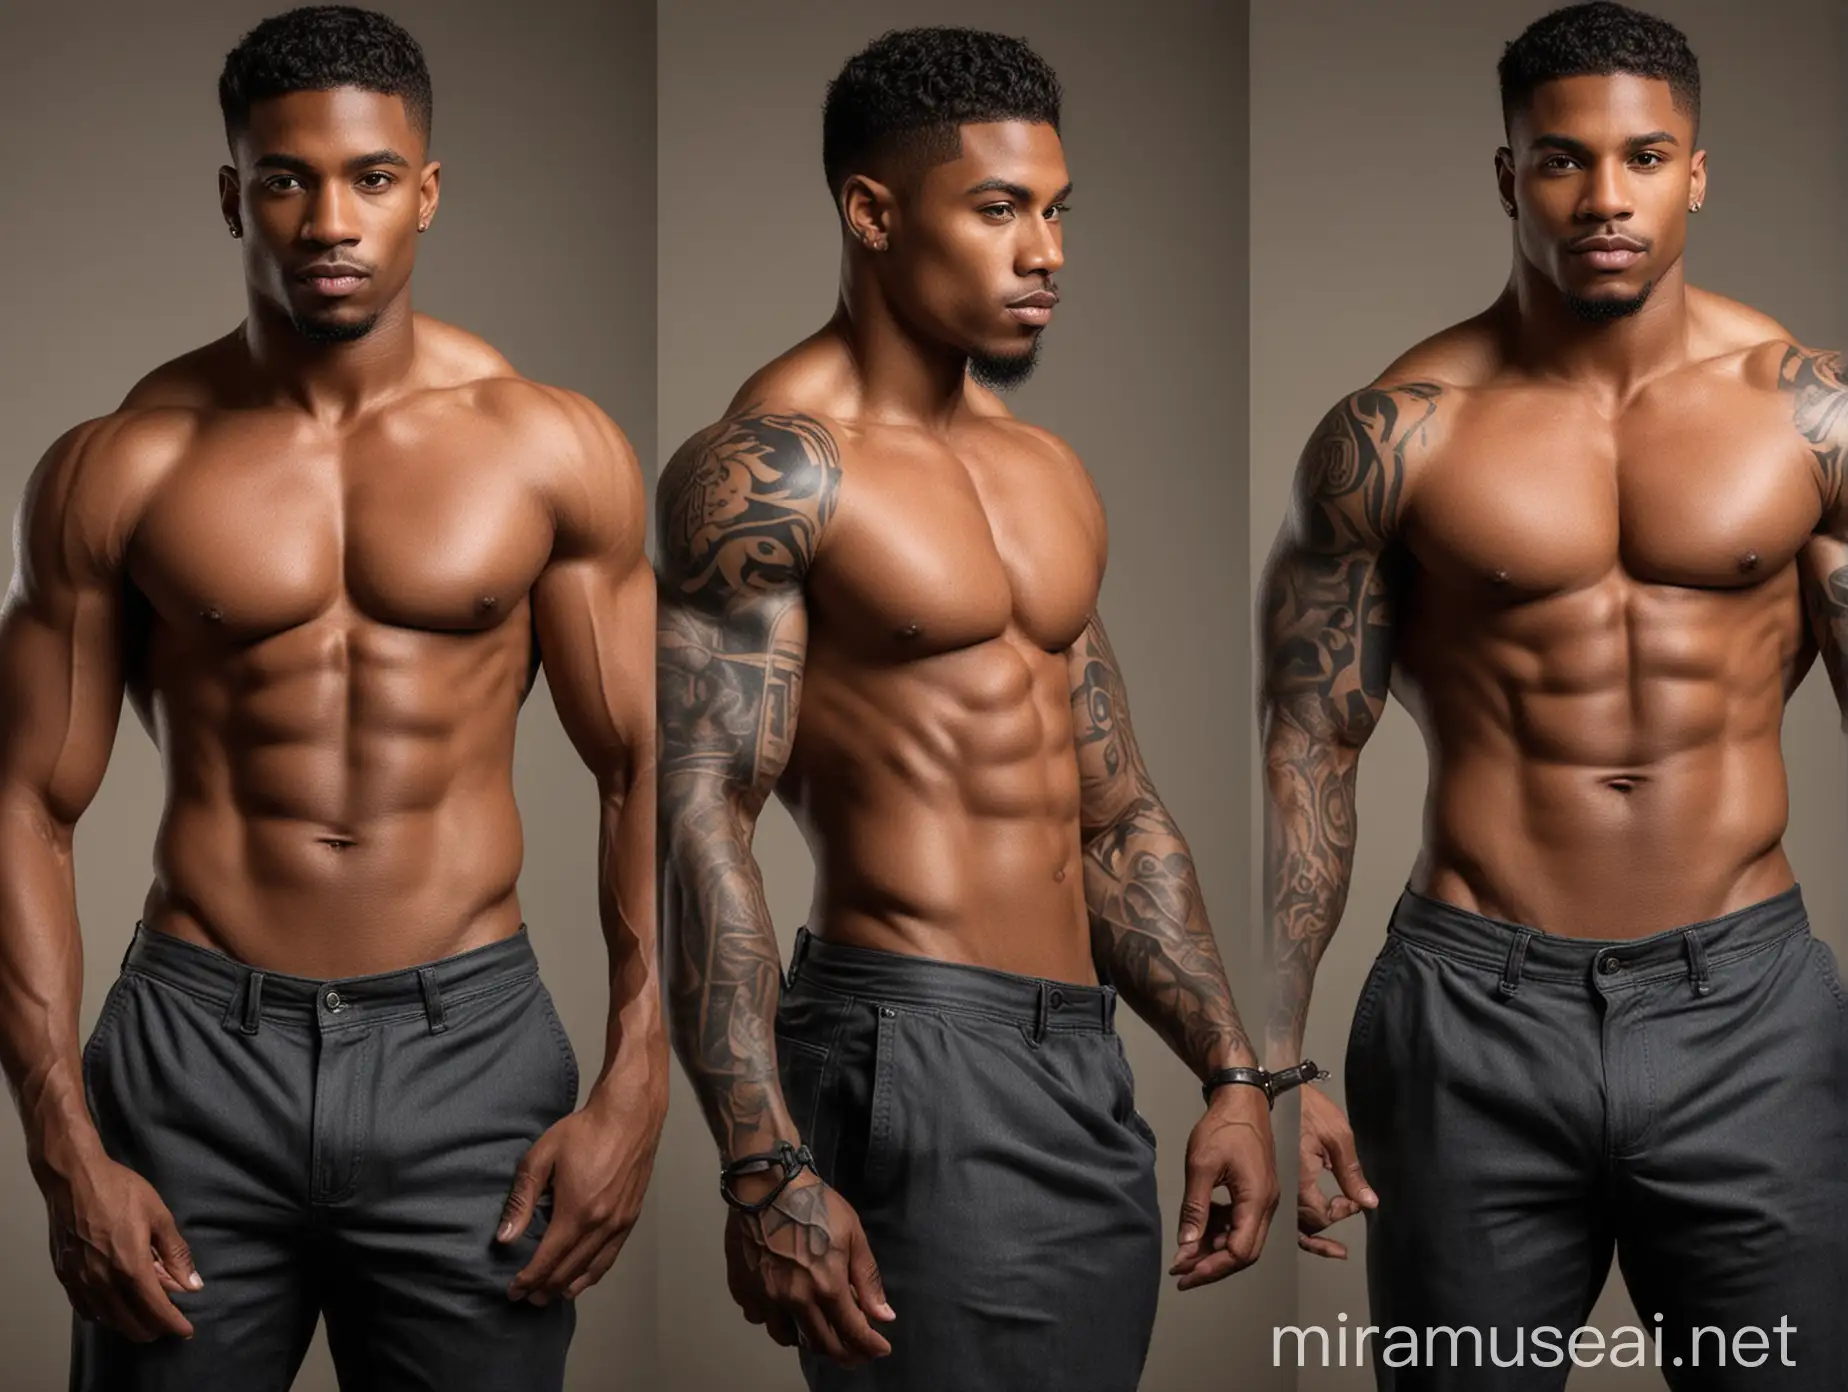 Hypermasculine Black Male in Tight Clothing Dominant Muscular Man with Sleeve Tattoo